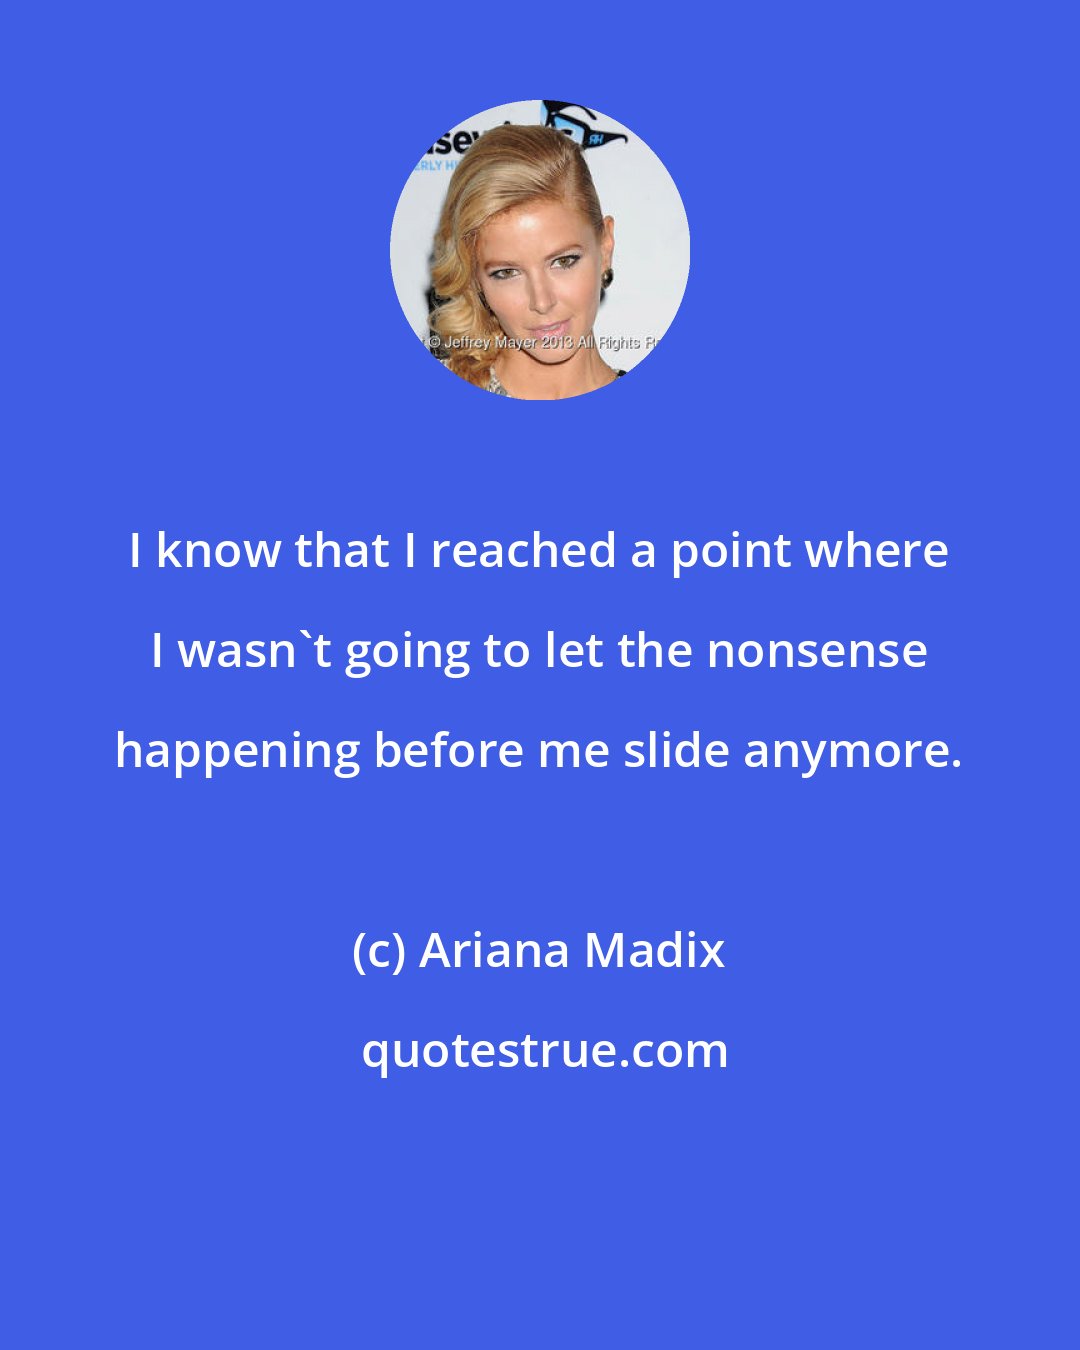 Ariana Madix: I know that I reached a point where I wasn't going to let the nonsense happening before me slide anymore.